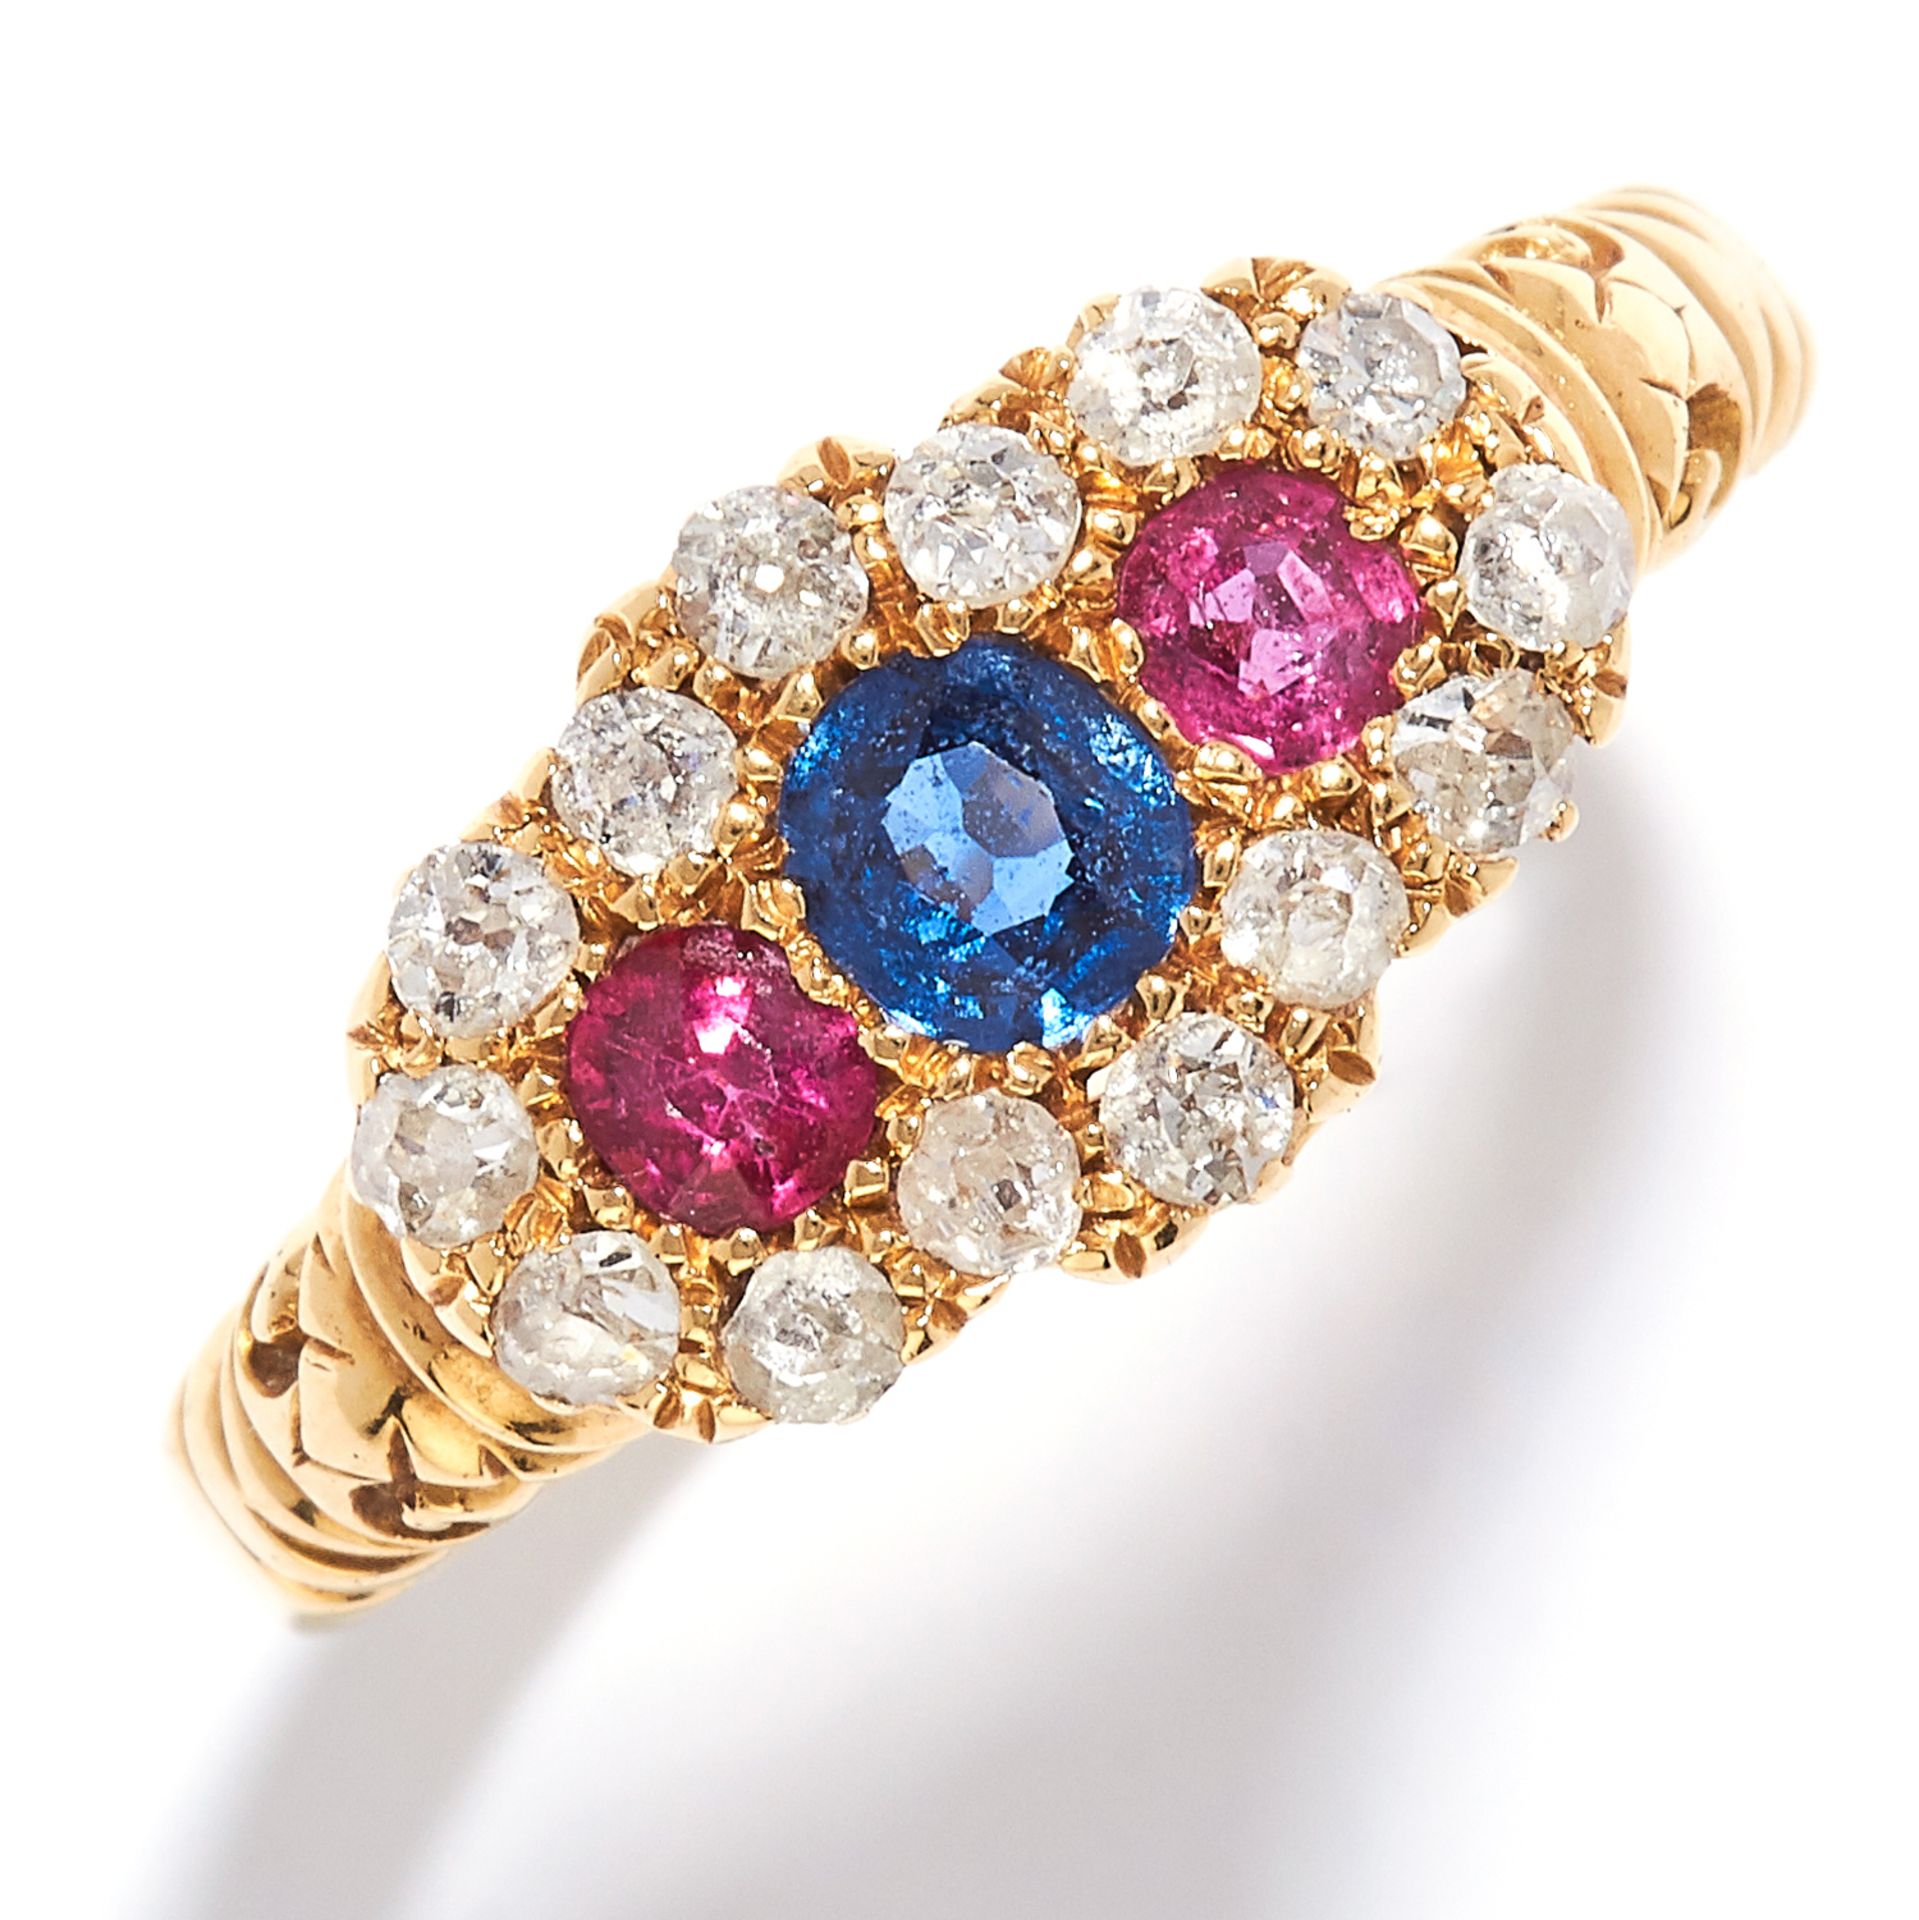 ANTIQUE SAPPHIRE, RUBY AND DIAMOND RING in 18ct yellow gold, set with a round cut sapphire between